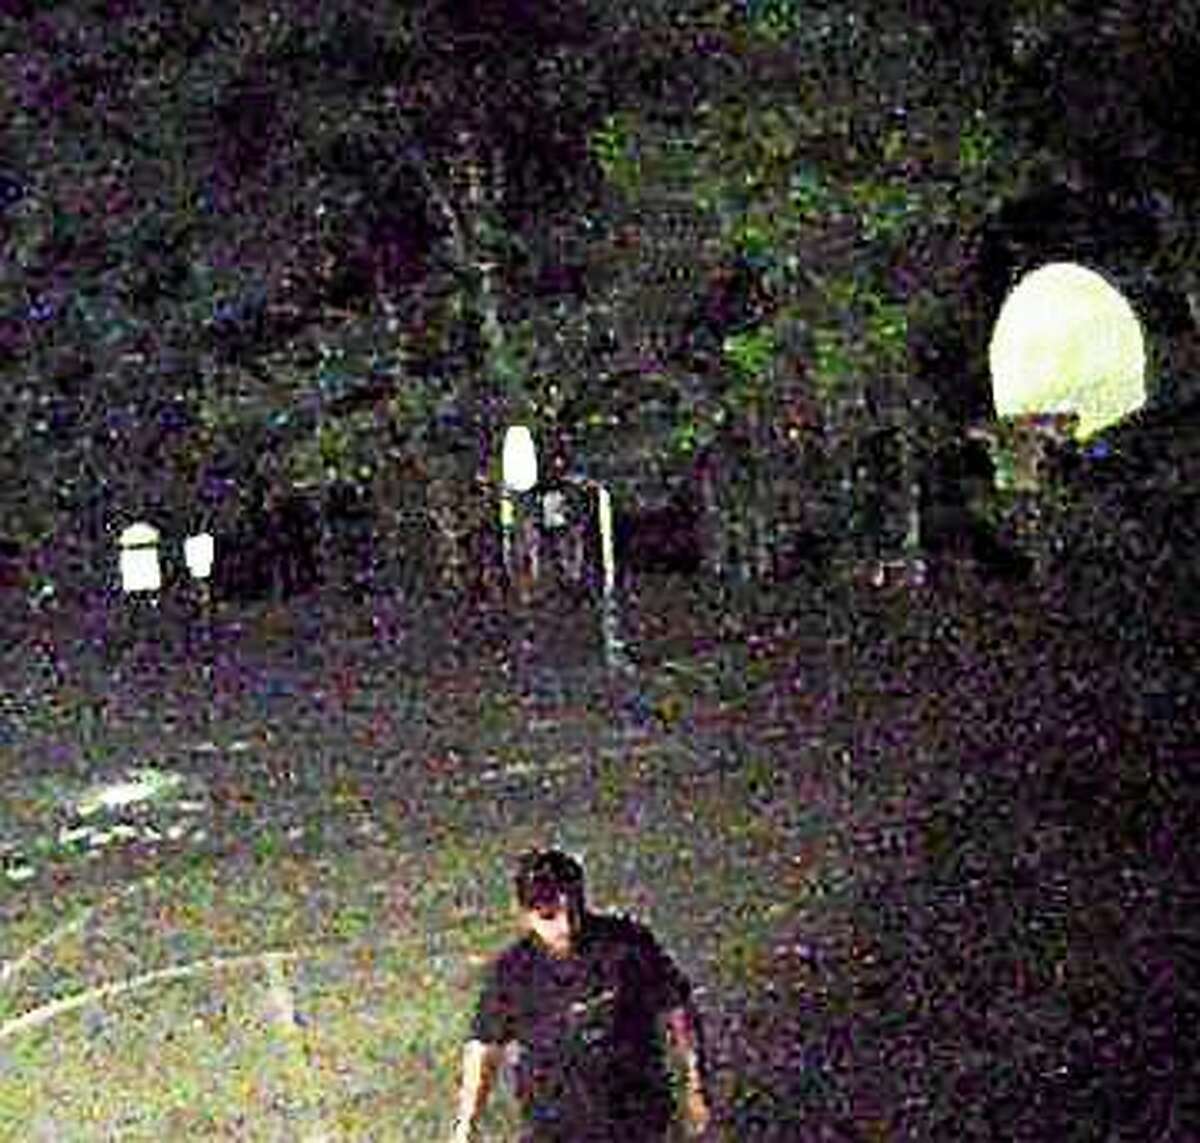 Police in Orange are investigating after someone spray painted “DX” and male genitalia around the campus at Race Brook School. Police say this man was captured on camera walking across the campus early Friday. Photo courtesy of the Orange Police Department.